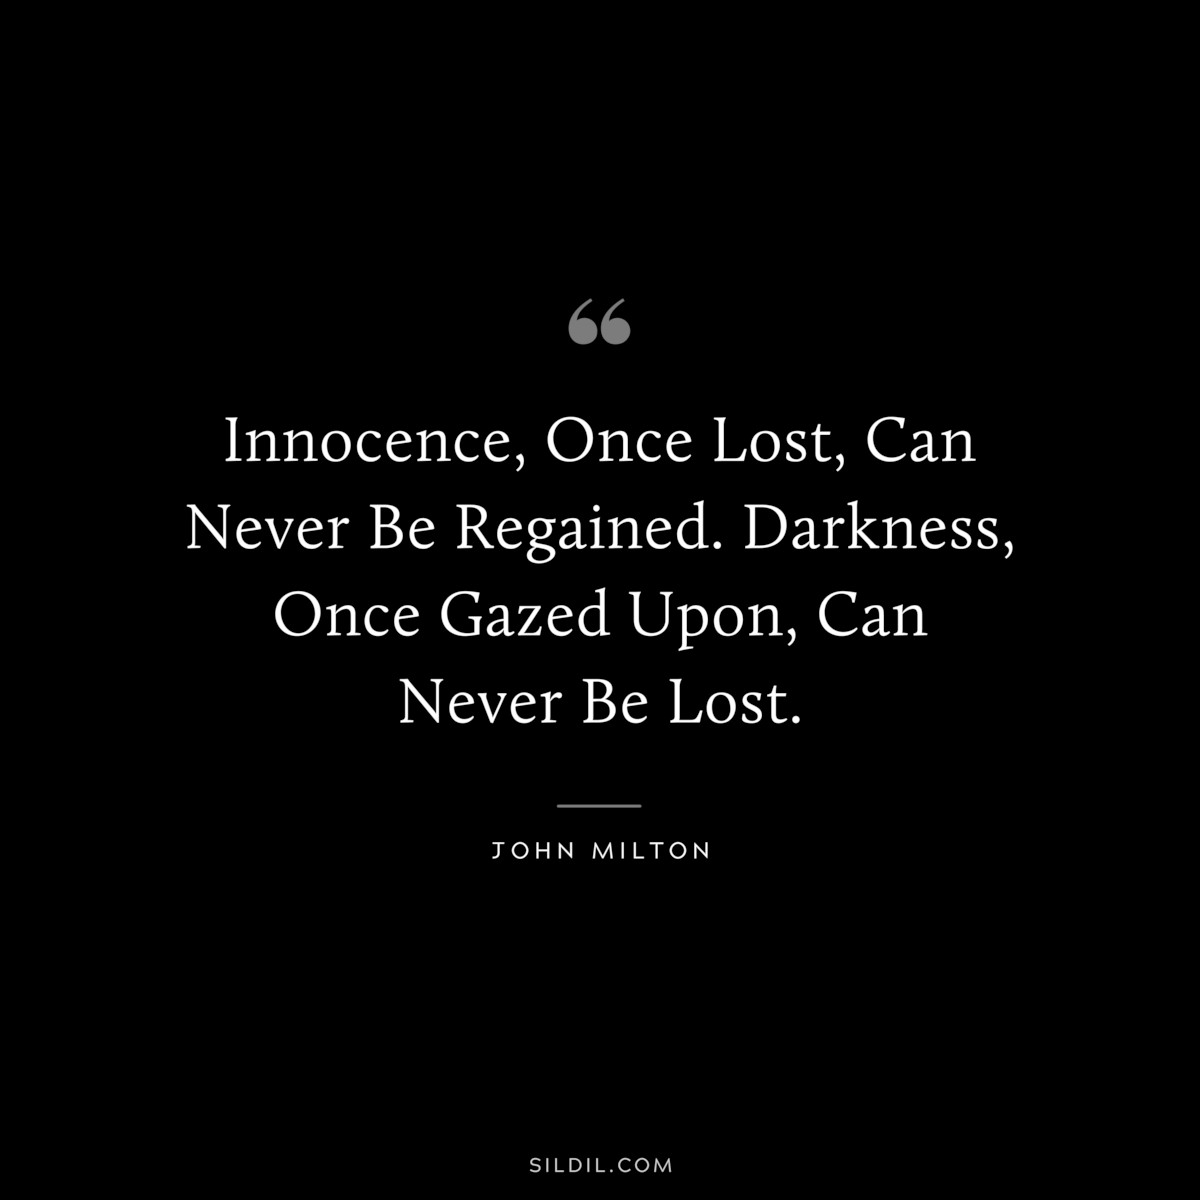 Innocence, Once Lost, Can Never Be Regained. Darkness, Once Gazed Upon, Can Never Be Lost. ― John Milton